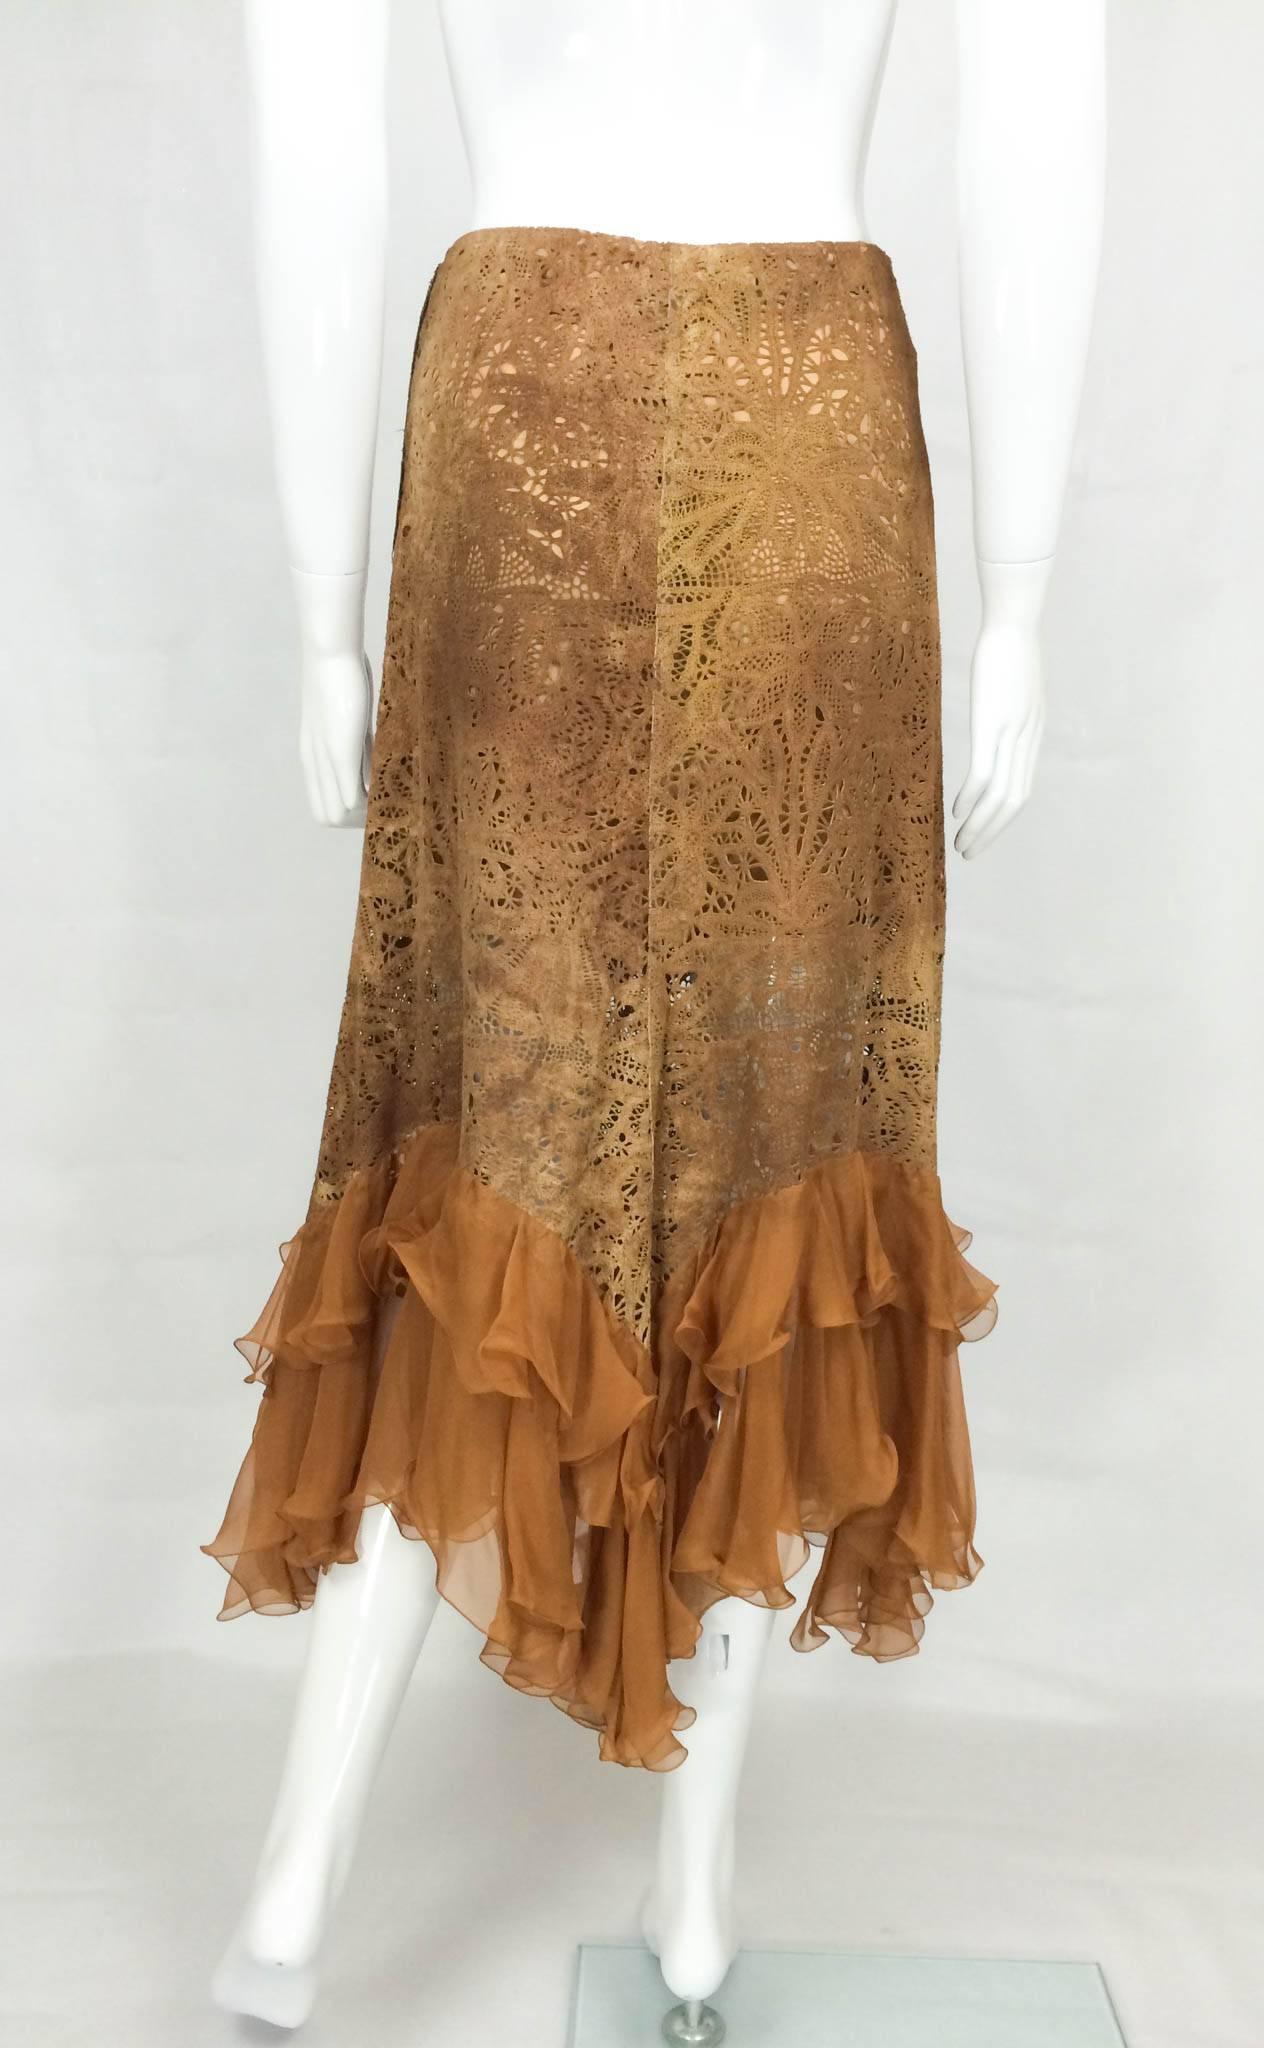 Emanuel Ungaro Suede Lace and Silk Ruffles Skirt - 1990s 1